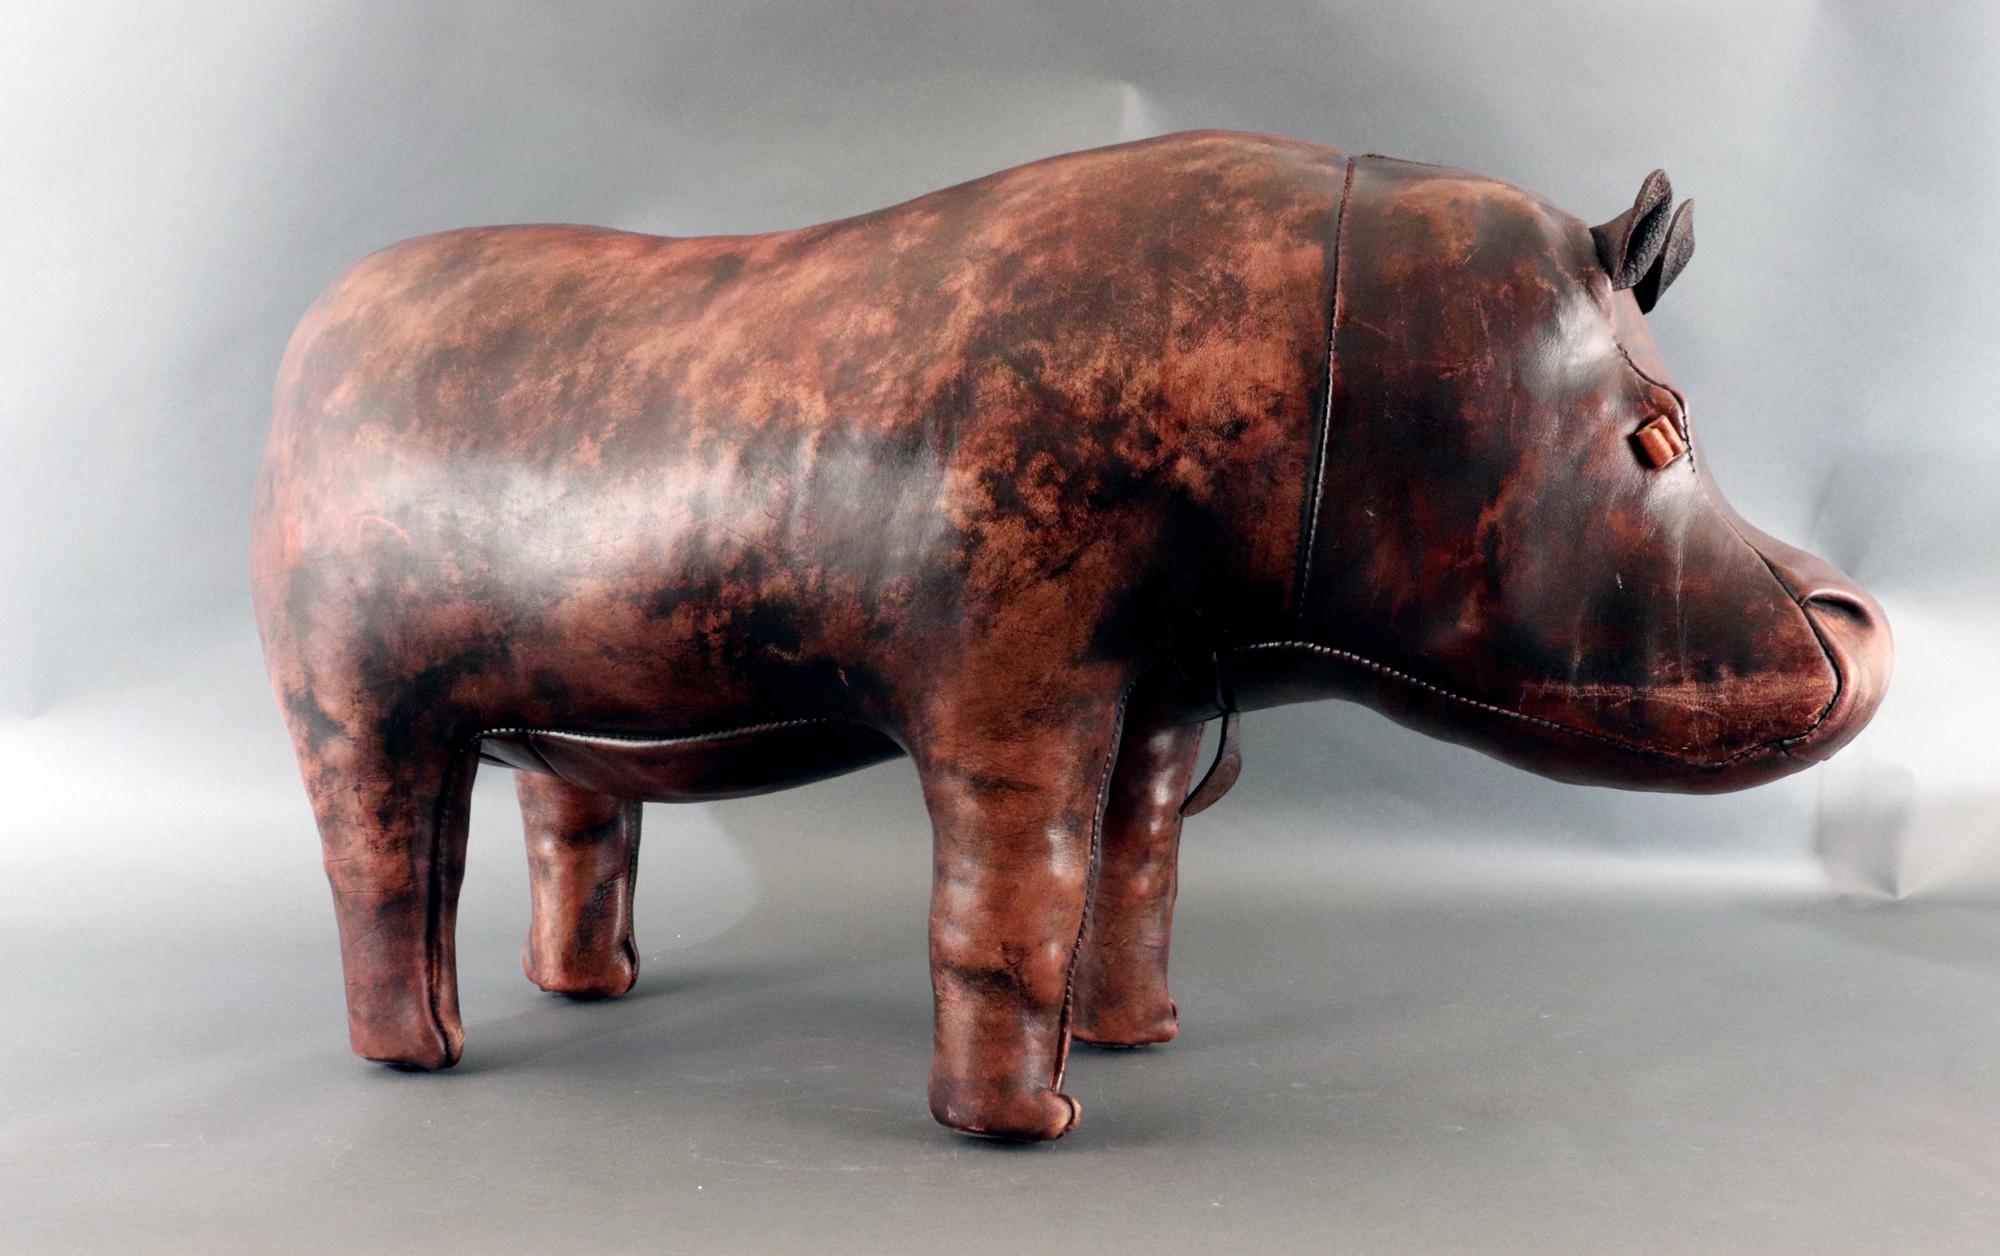 Mid-20th Century English Leather Footstool in the form of a Hippo, Jancraft for Dimitri Omersa